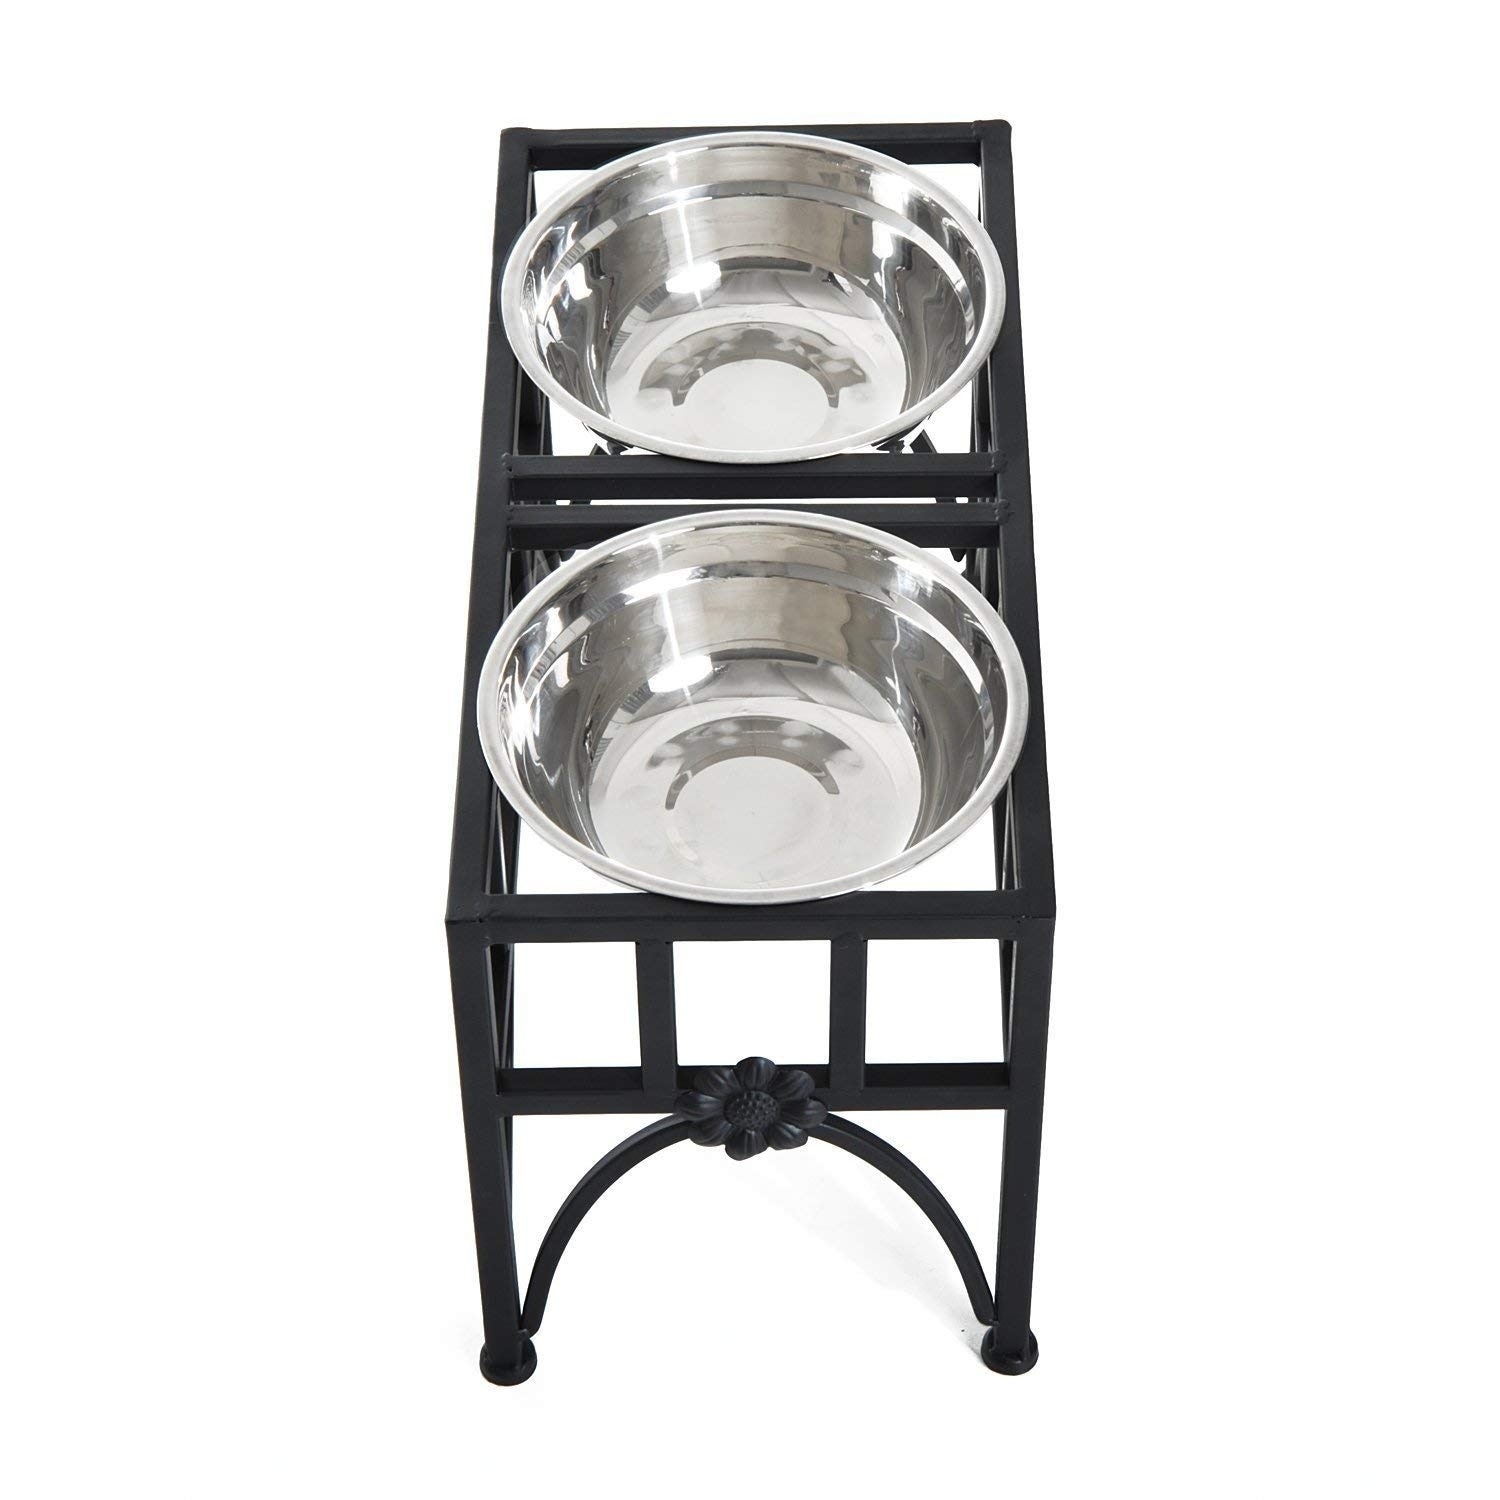 https://ak1.ostkcdn.com/images/products/22408080/PawHut-17-Double-Stainless-Steel-Heavy-Duty-Dog-Food-Bowl-Pet-Elevated-Feeding-Station-8805147a-b262-4f8c-bcee-3b40e8cae2e2.jpg